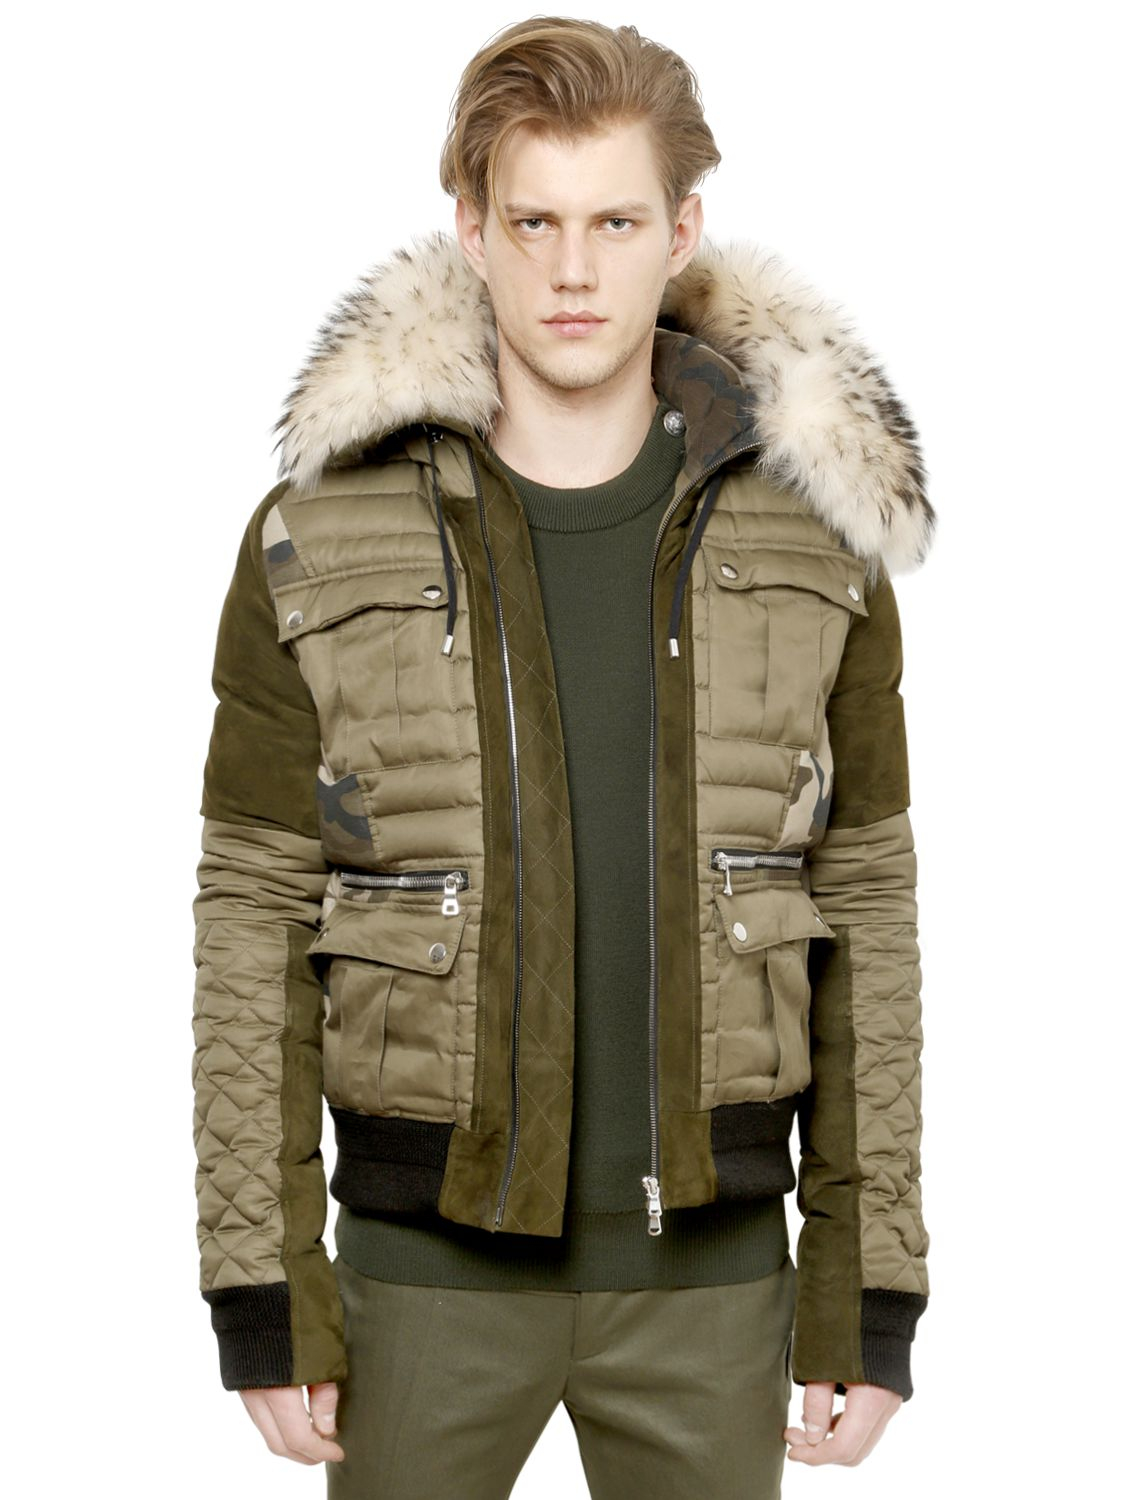 Lyst - Balmain Hooded Cotton Canvas Suede Down Jacket in Green for Men